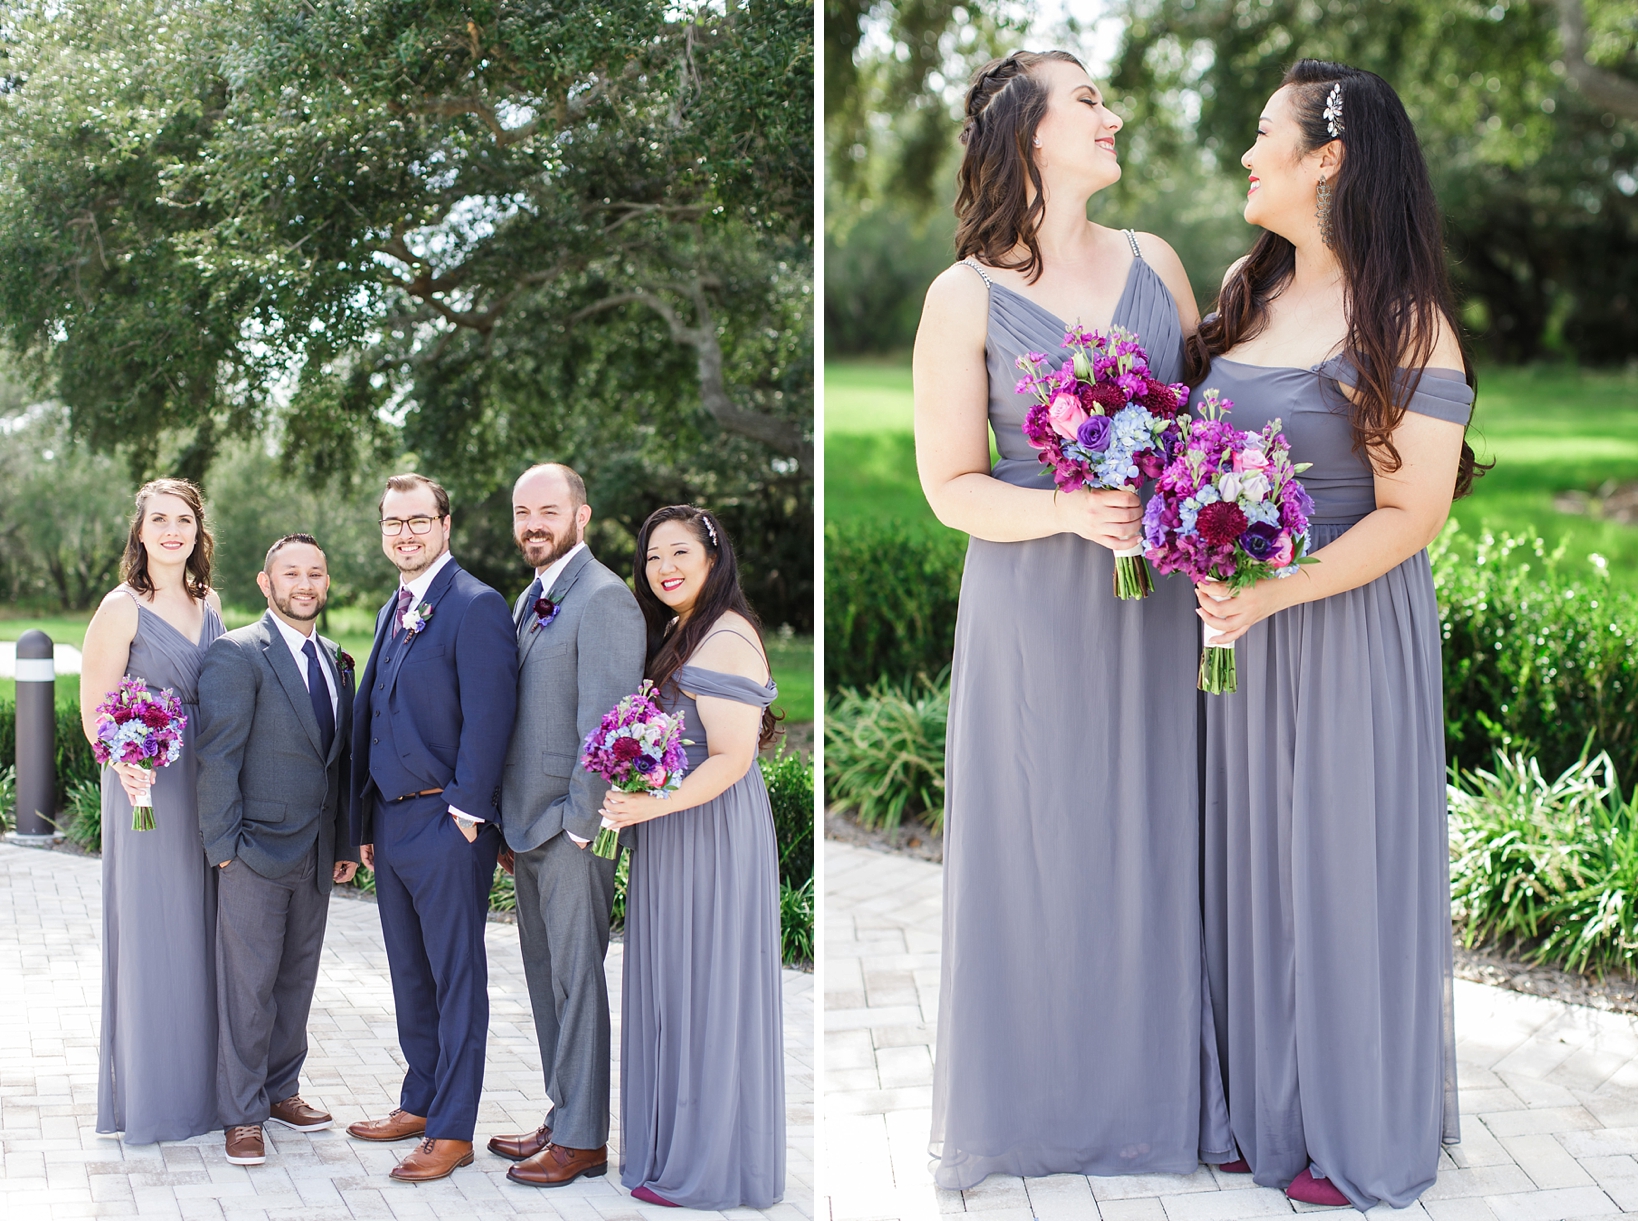 Groom with his bridal party that included both men and women by Sarah & Ben Photography